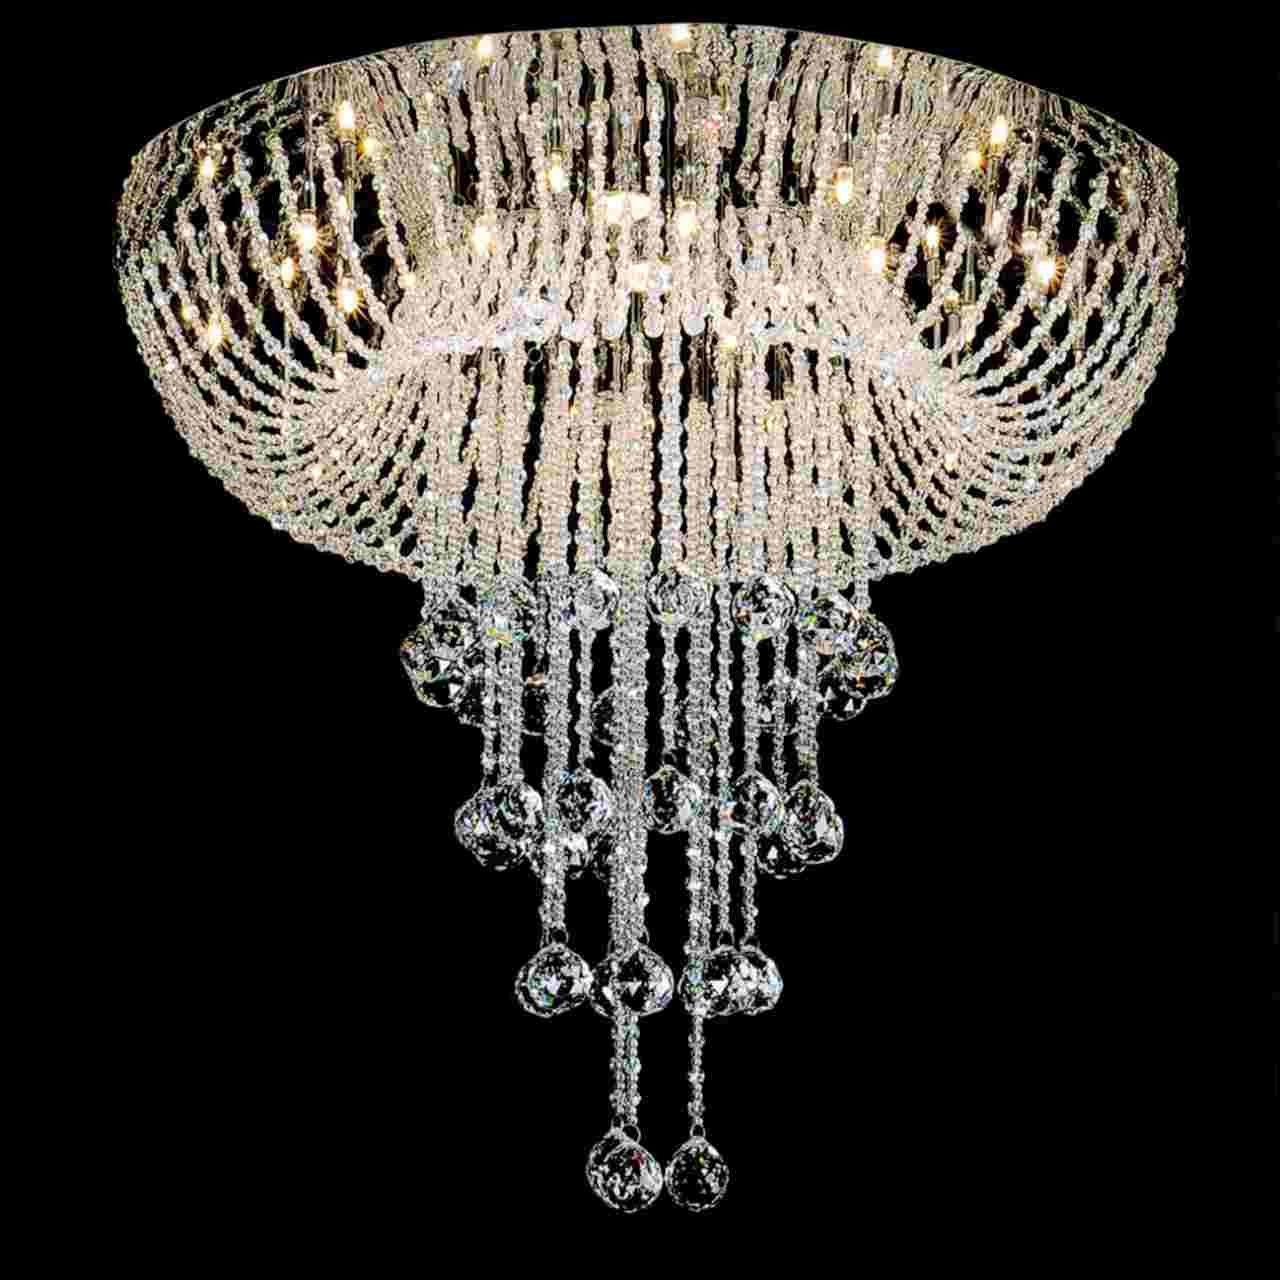 Brizzo Lighting Stores 40mm Asfour Crystal Ball 30 Pbo 701 40 With Regard To Lead Crystal Chandeliers (View 9 of 15)